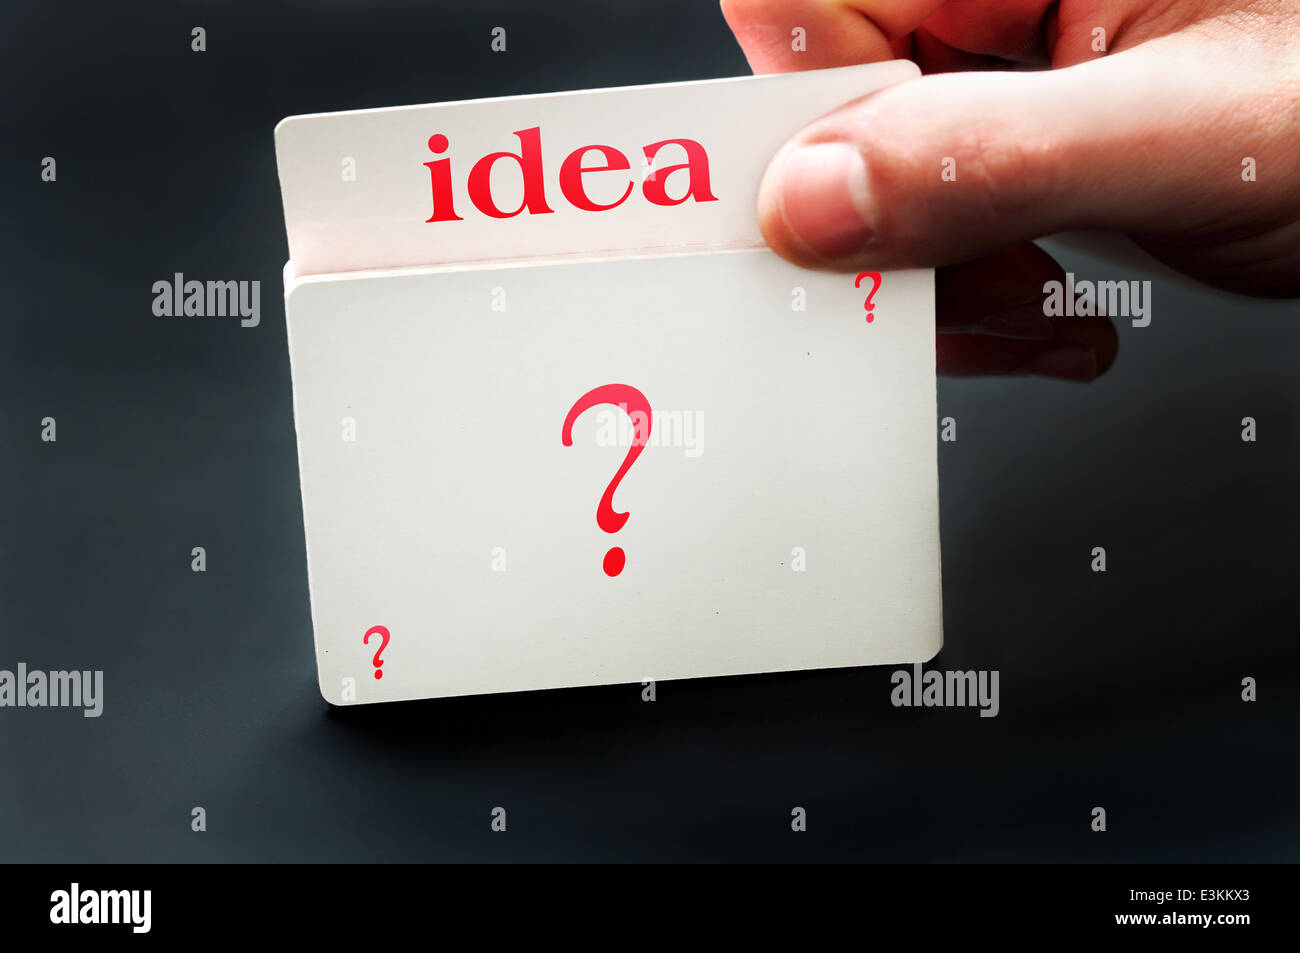 Idea card from question deck of cards Stock Photo